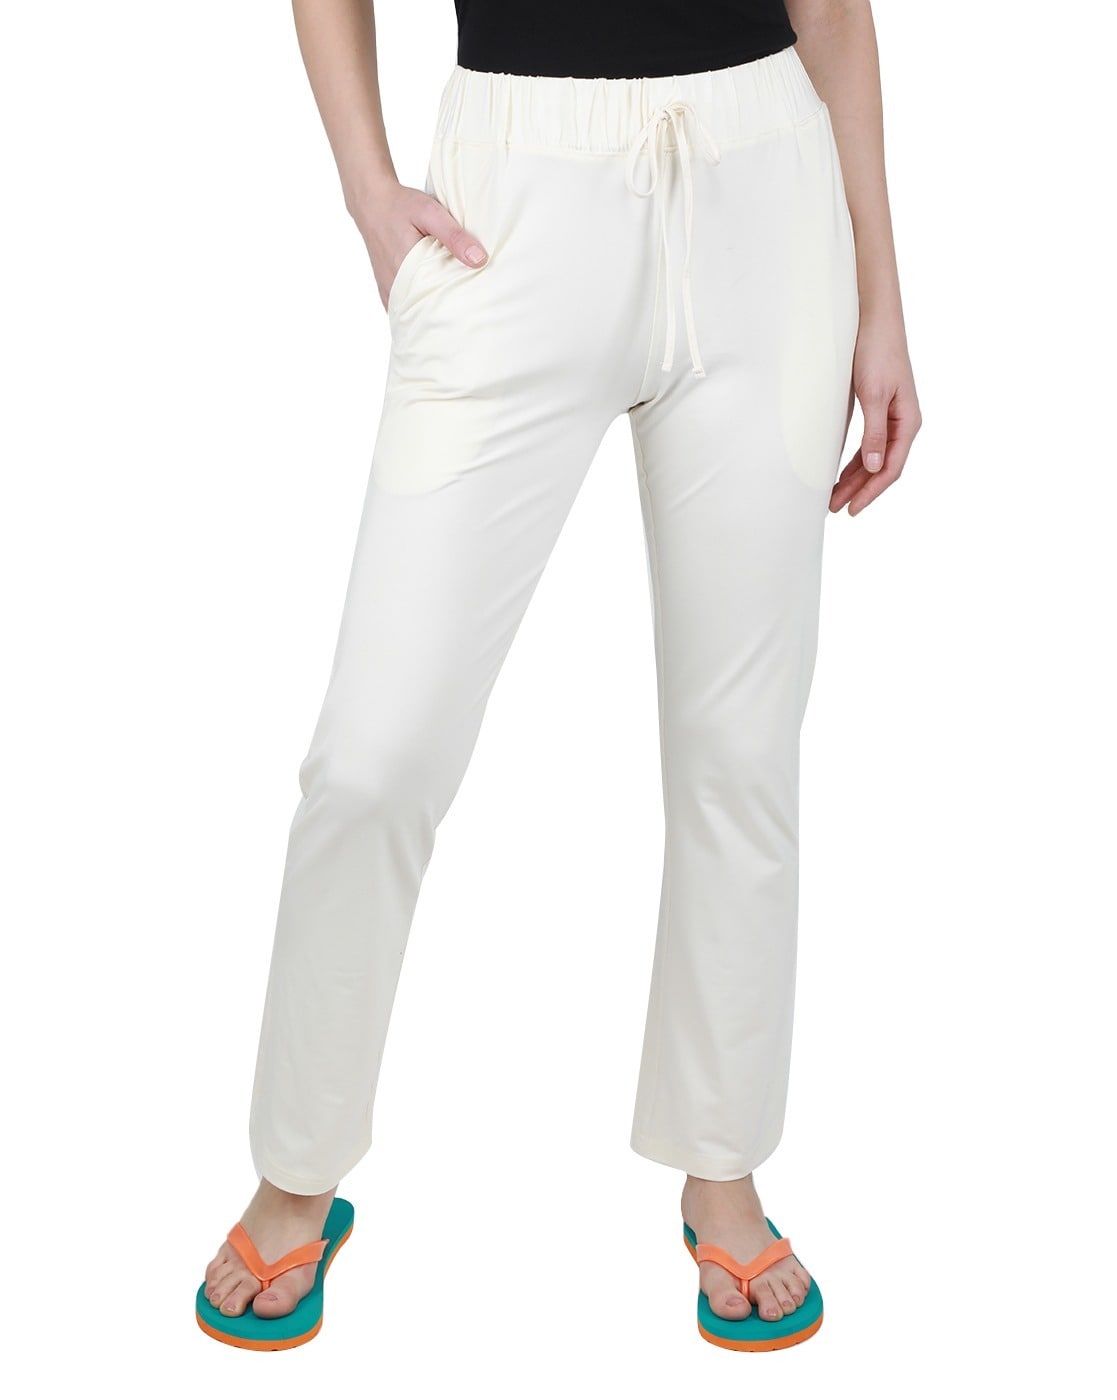 Buy Off White Track Pants for Women by MONTE CARLO Online